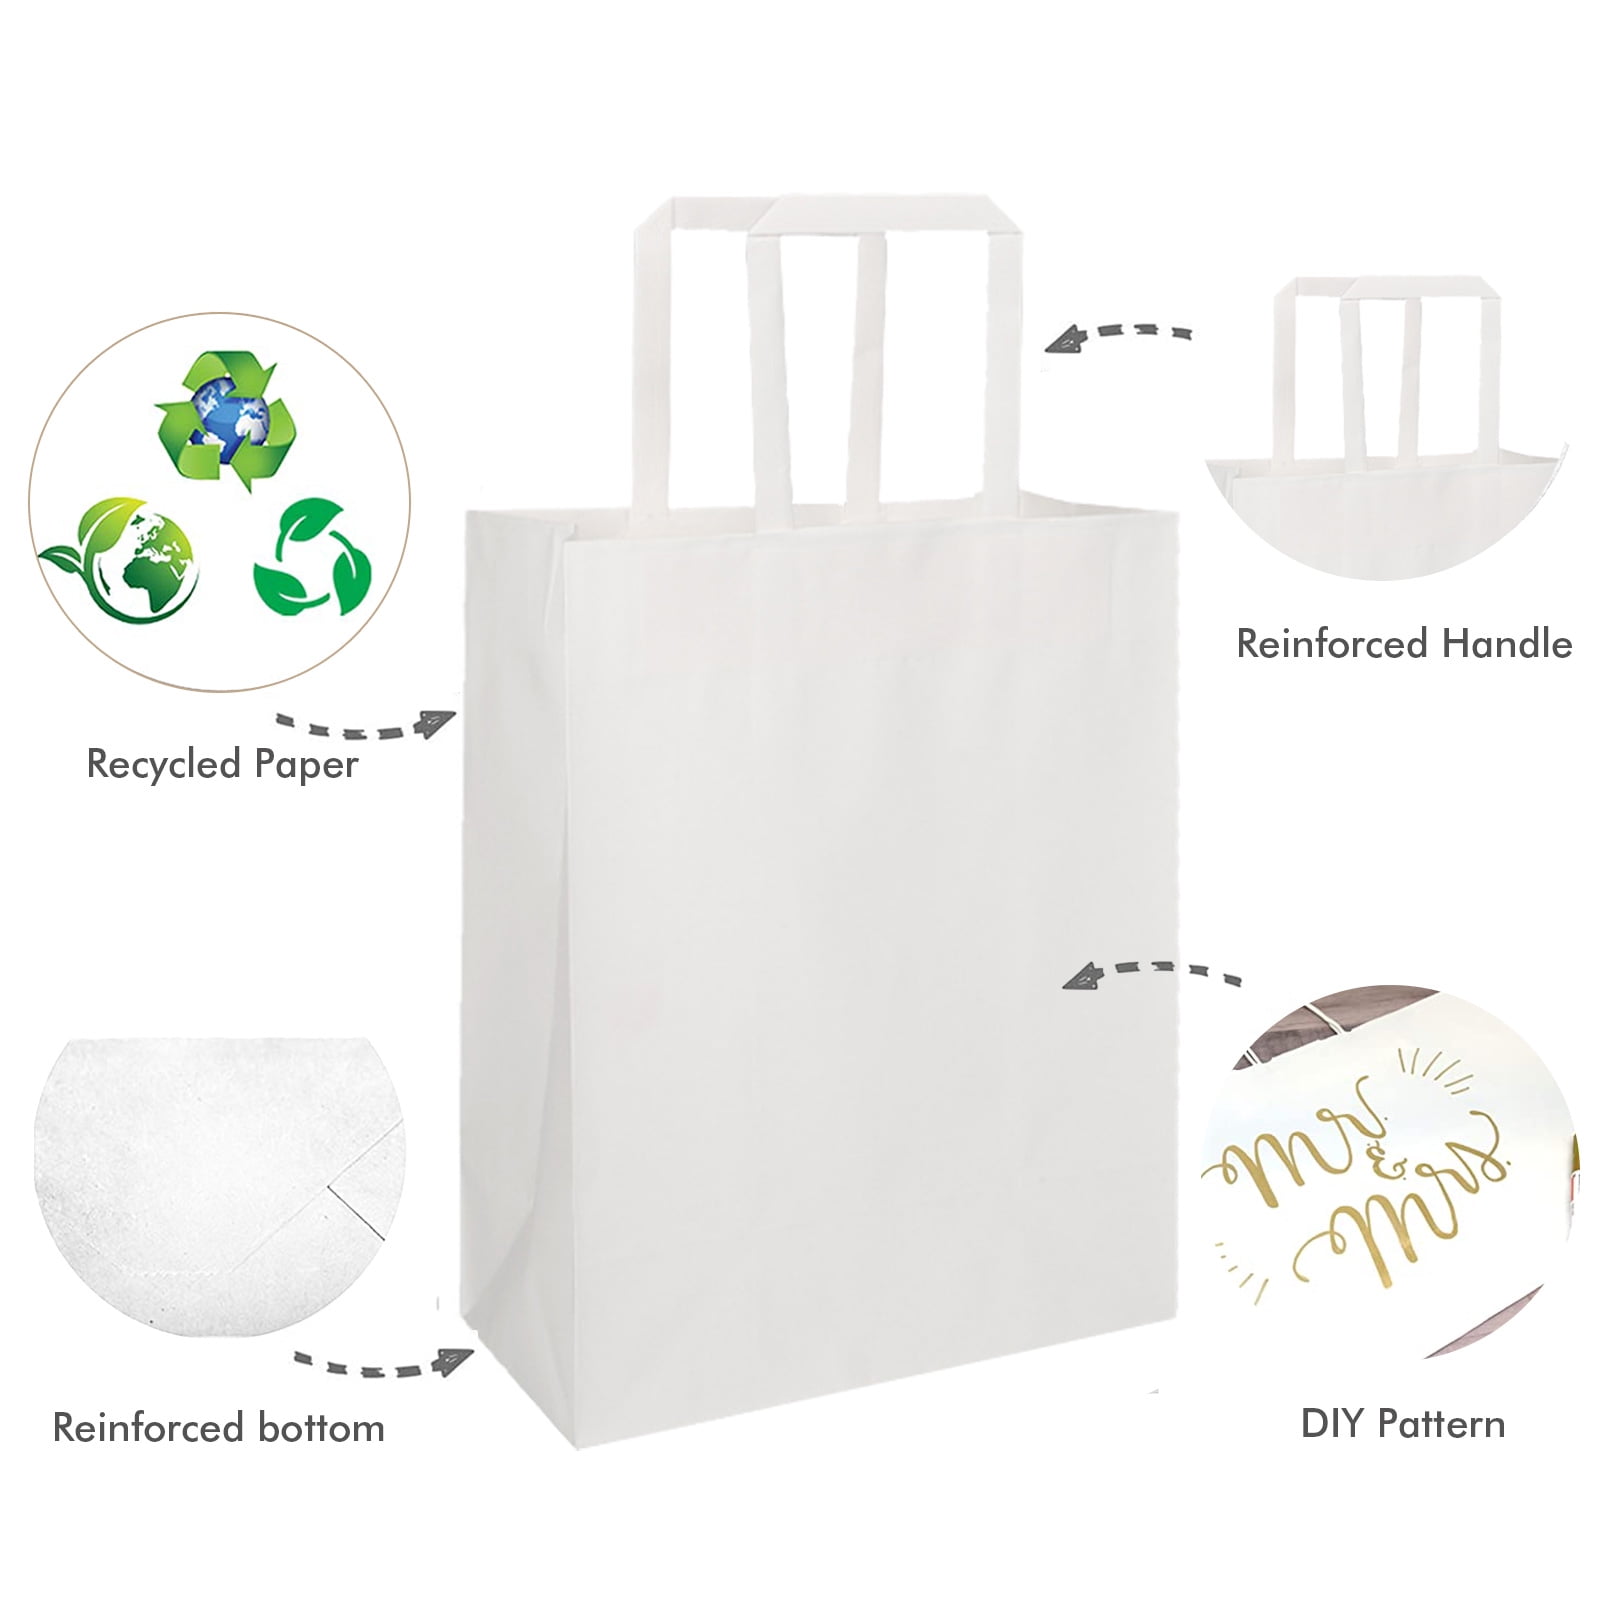  【24pcs Bags】Paper Bags With Handles- 8x10x4 Brown Shopping  Bags-Gift Bags With Chalk Sticker : Health & Household